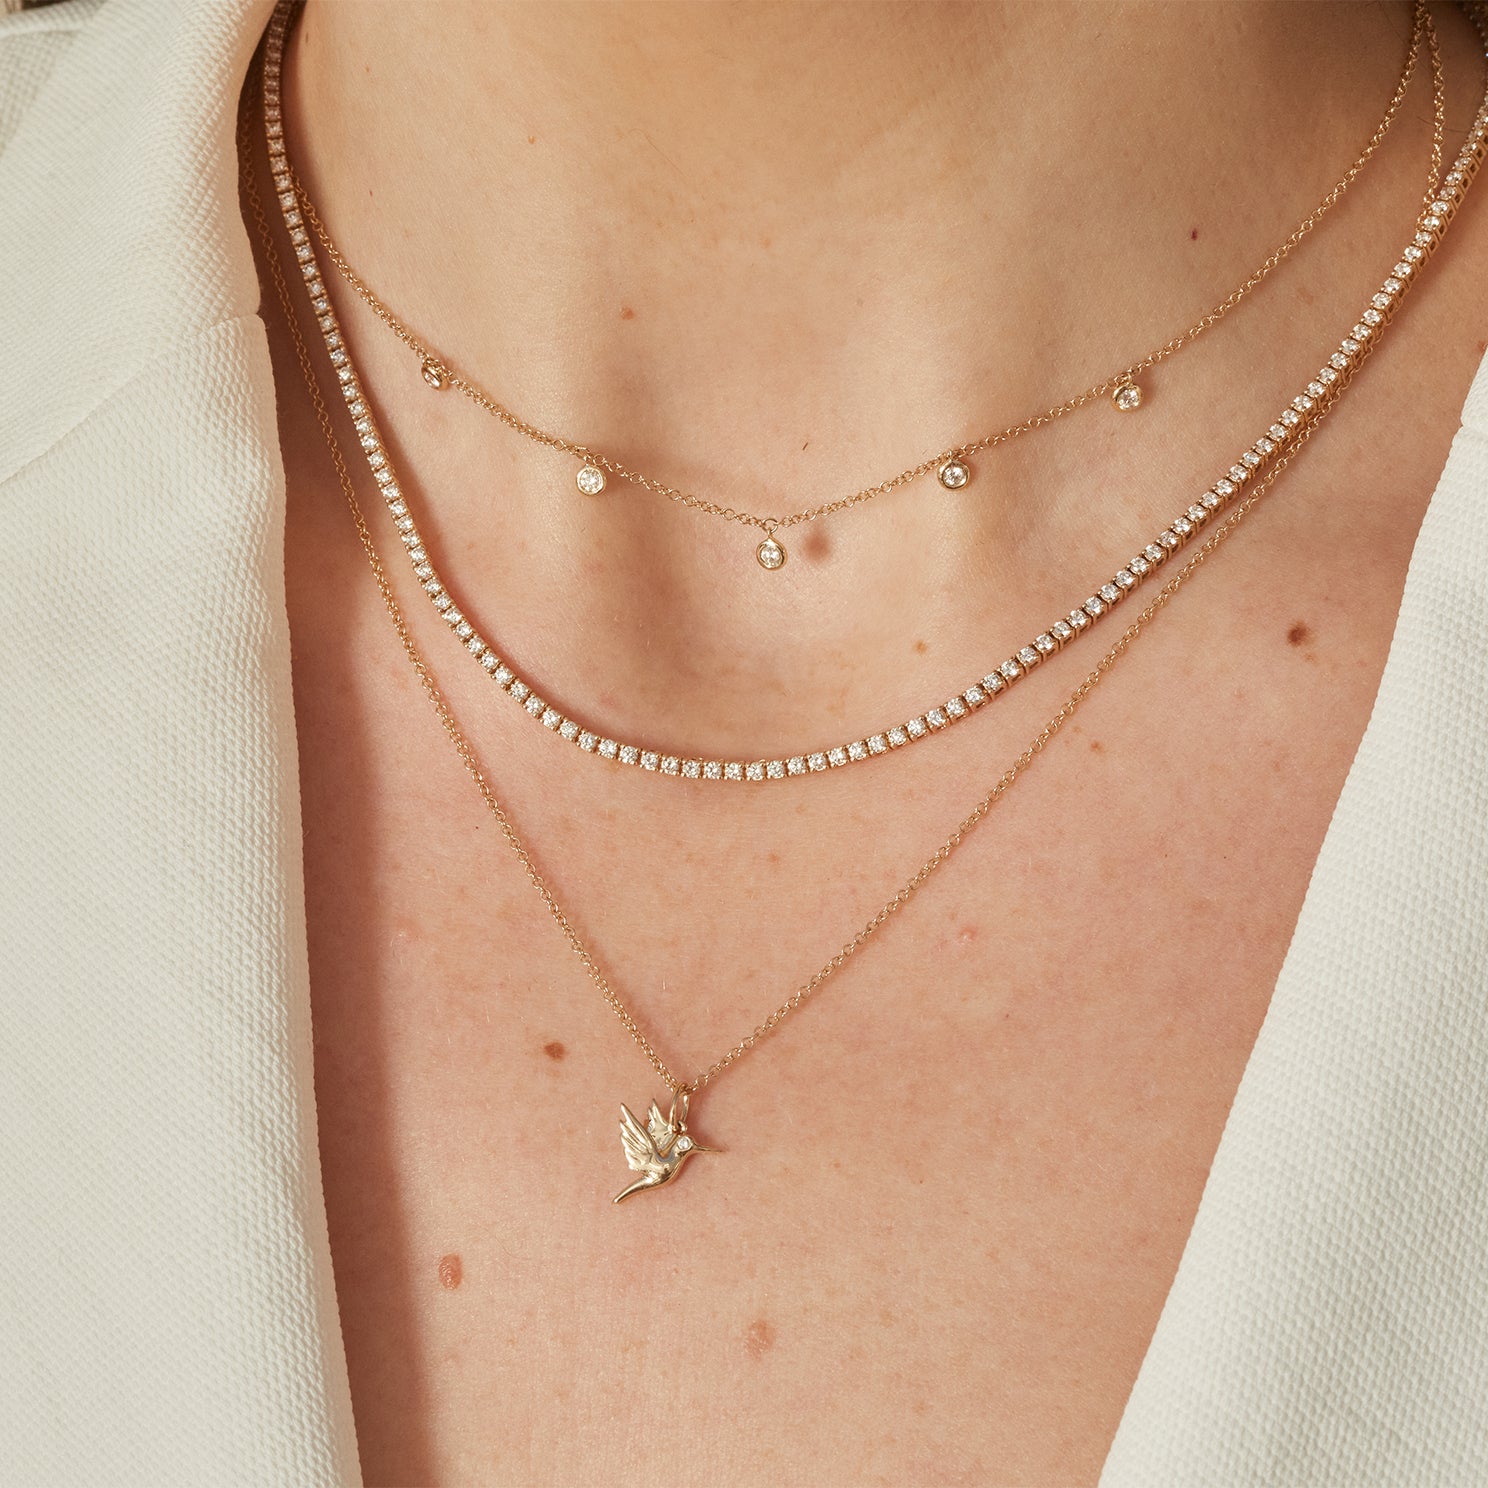 5 Diamond Bezel Choker Necklace in 14k yellow gold styled on neck of model with diamond necklace and hummingbird necklace